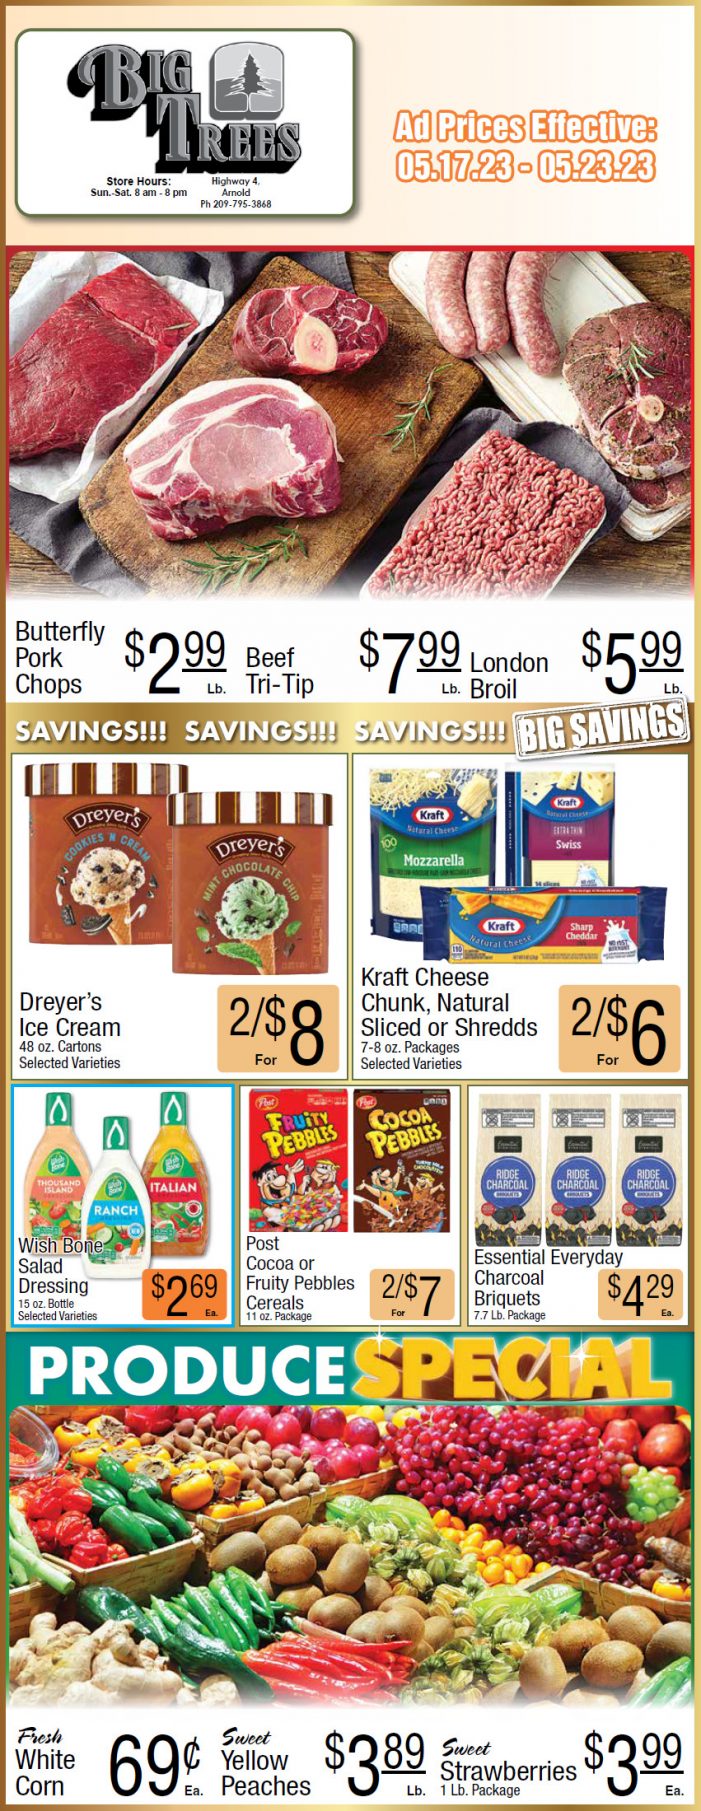 Big Trees Market Weekly Ad, Grocery, Produce, Meat & Deli Specials May 17-23!  Shop Local & Save!